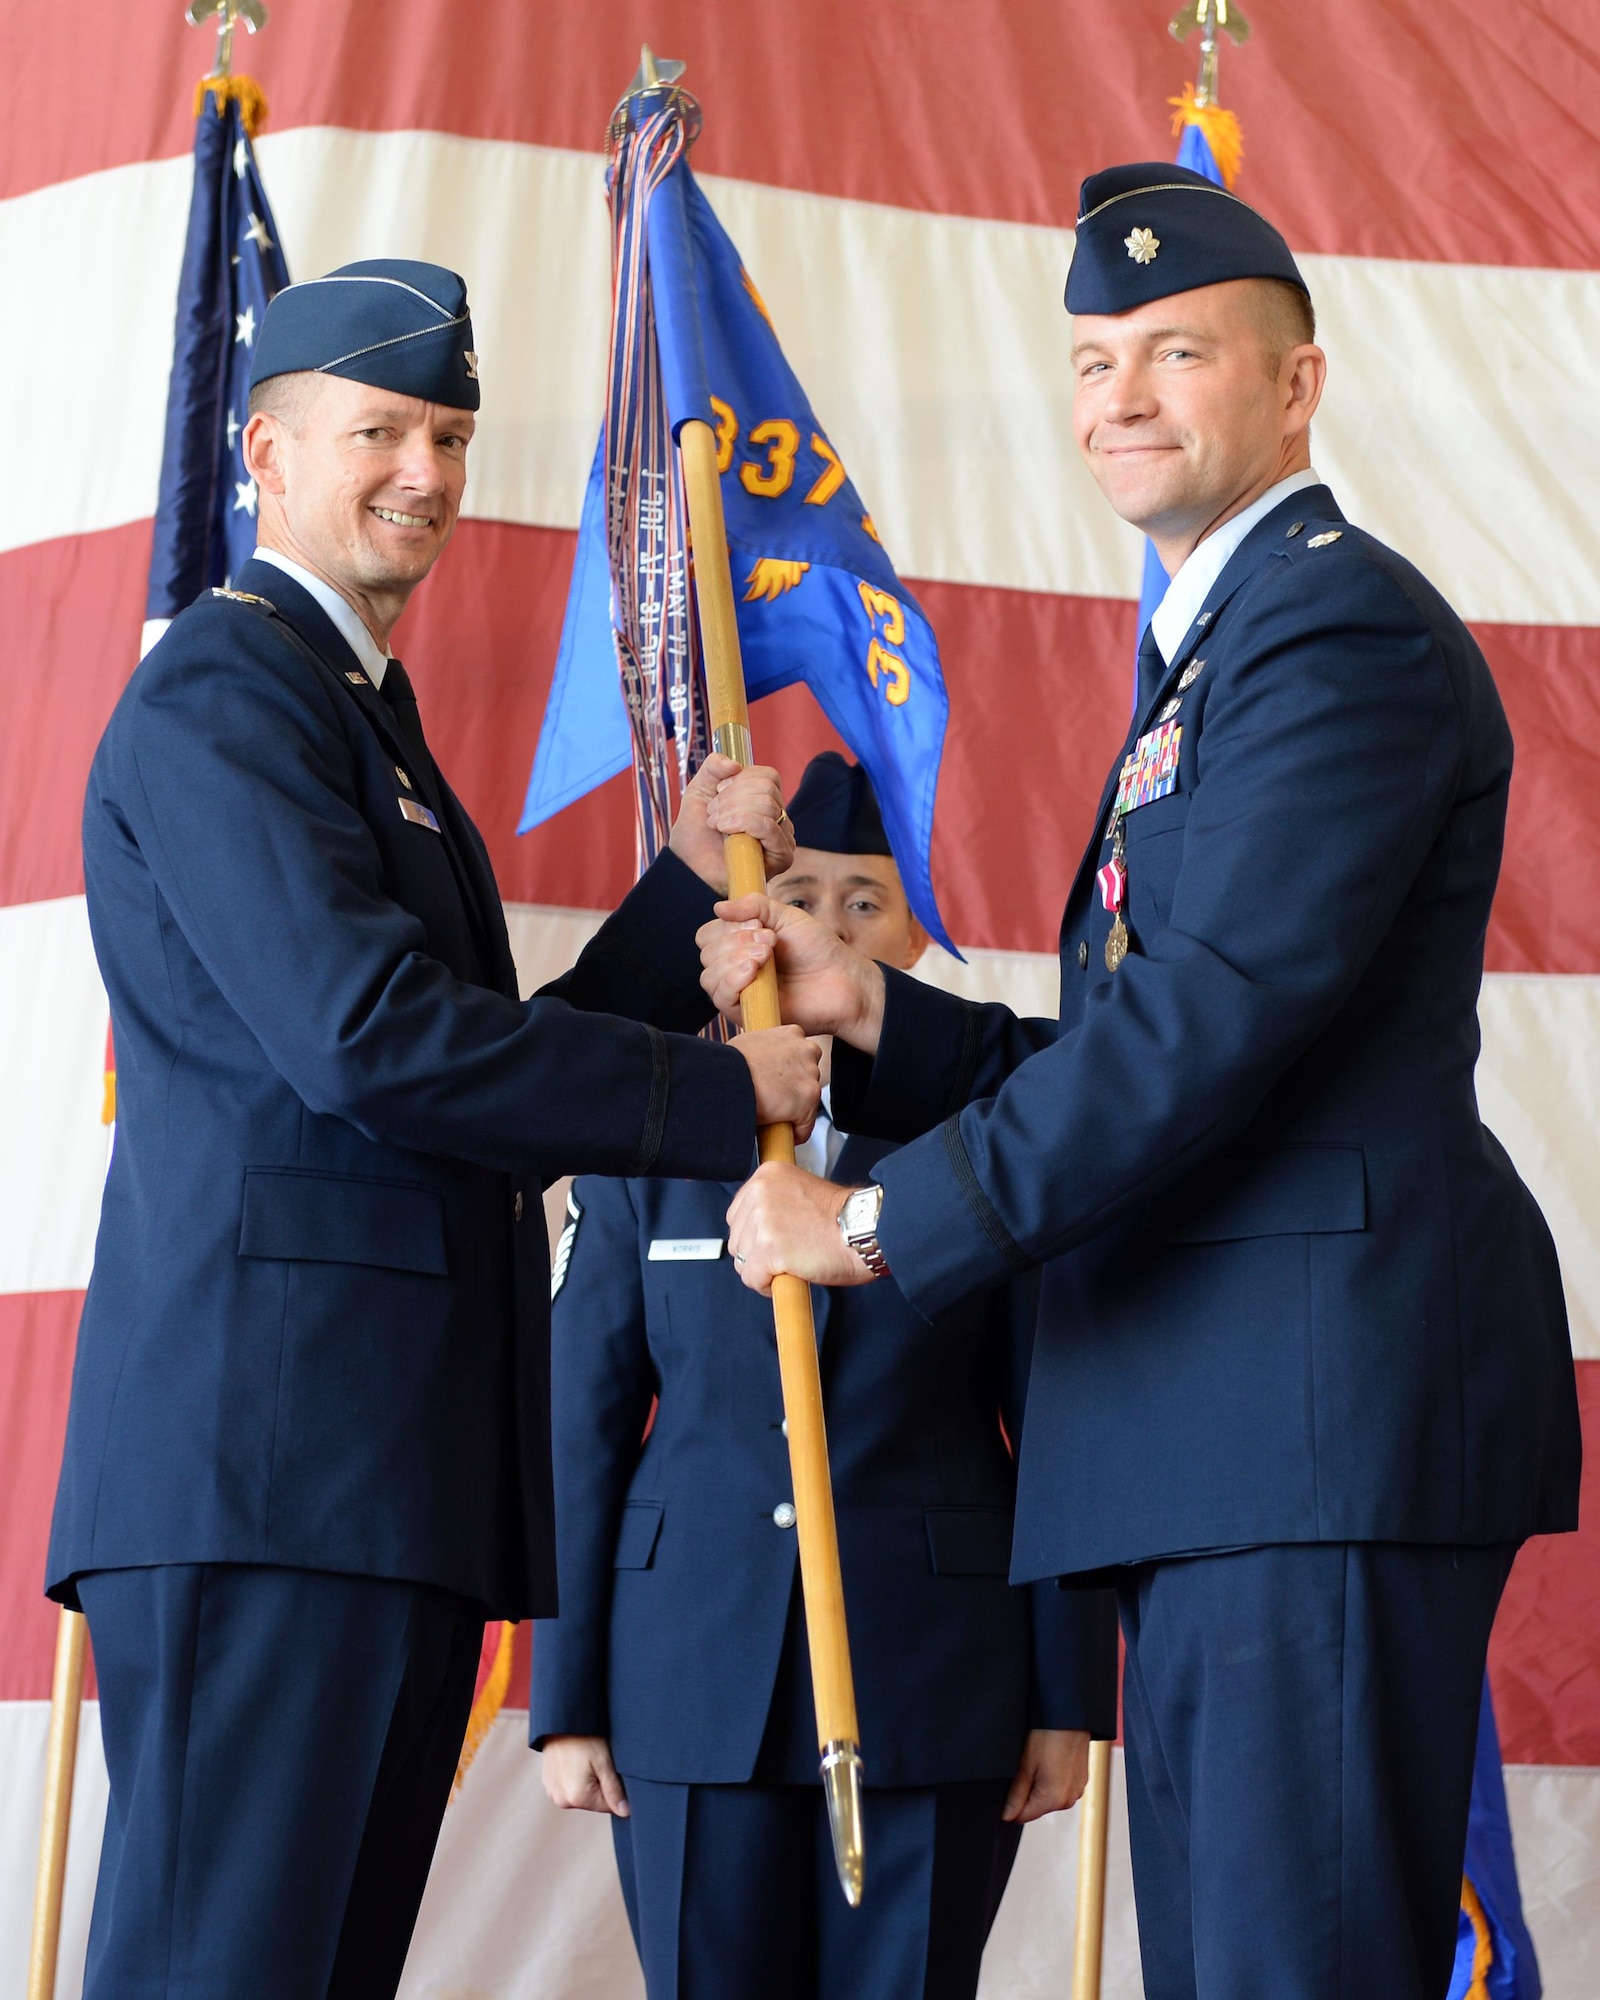 Col. Christopher Niemi, 33rd Fighter Wing Operations Group commander, passes the guidon to Lt. Col. Keith McGuire, incoming 337th Air Control Squadron commander, during a change of command at Tyndall Air Force Base, Fla., May 5, 2016. The 337th ACS is assigned to the 33rd Fighter Wing at Eglin AFB, Fla. The squadron's primary responsibilities include training all U.S. Air Force, Air National Guard and Air Force Reserve air battle manager officers for command and control missions on a variety of weapons systems in support of air expeditionary forces worldwide. (U.S. Air Force photo/Airman 1st Class Cody R. Miller)